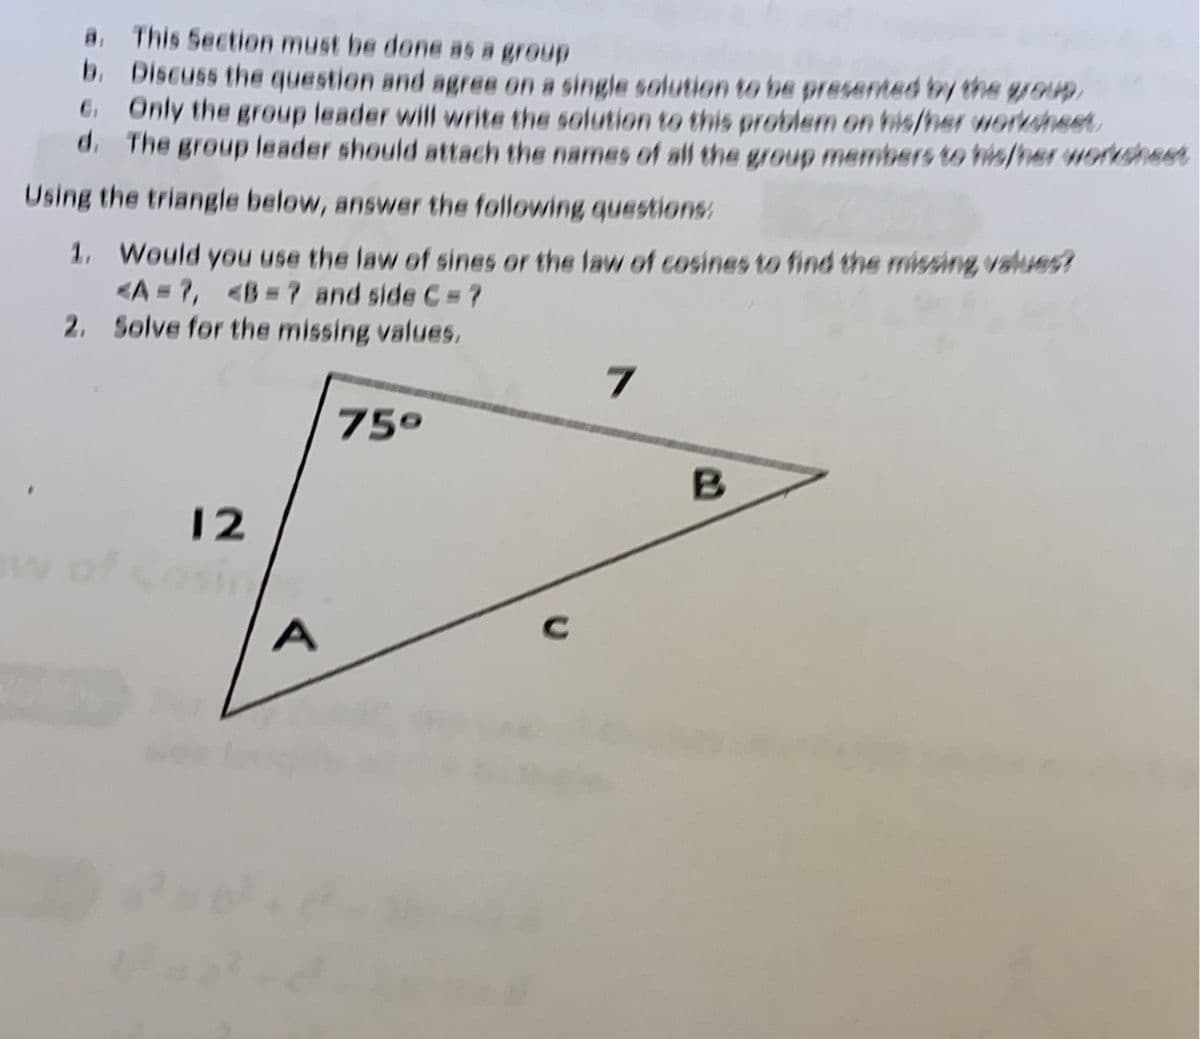 This Section must be done as a group
b. Discuss the question and agree on a single solution to be presented by the gJOH),
G Only the group leader will write the solution to this problem on his/her worksheet
d. The group leader should attach the names of all the group members to his/her worksheet
Using the triangle below, answer the following questions:
1. Would you use the law of sines or the law of cosines to find the missing, values?
<A=7, <B=? and side C = ?
2. Solve for the missing values,
75°
12
w ofc
